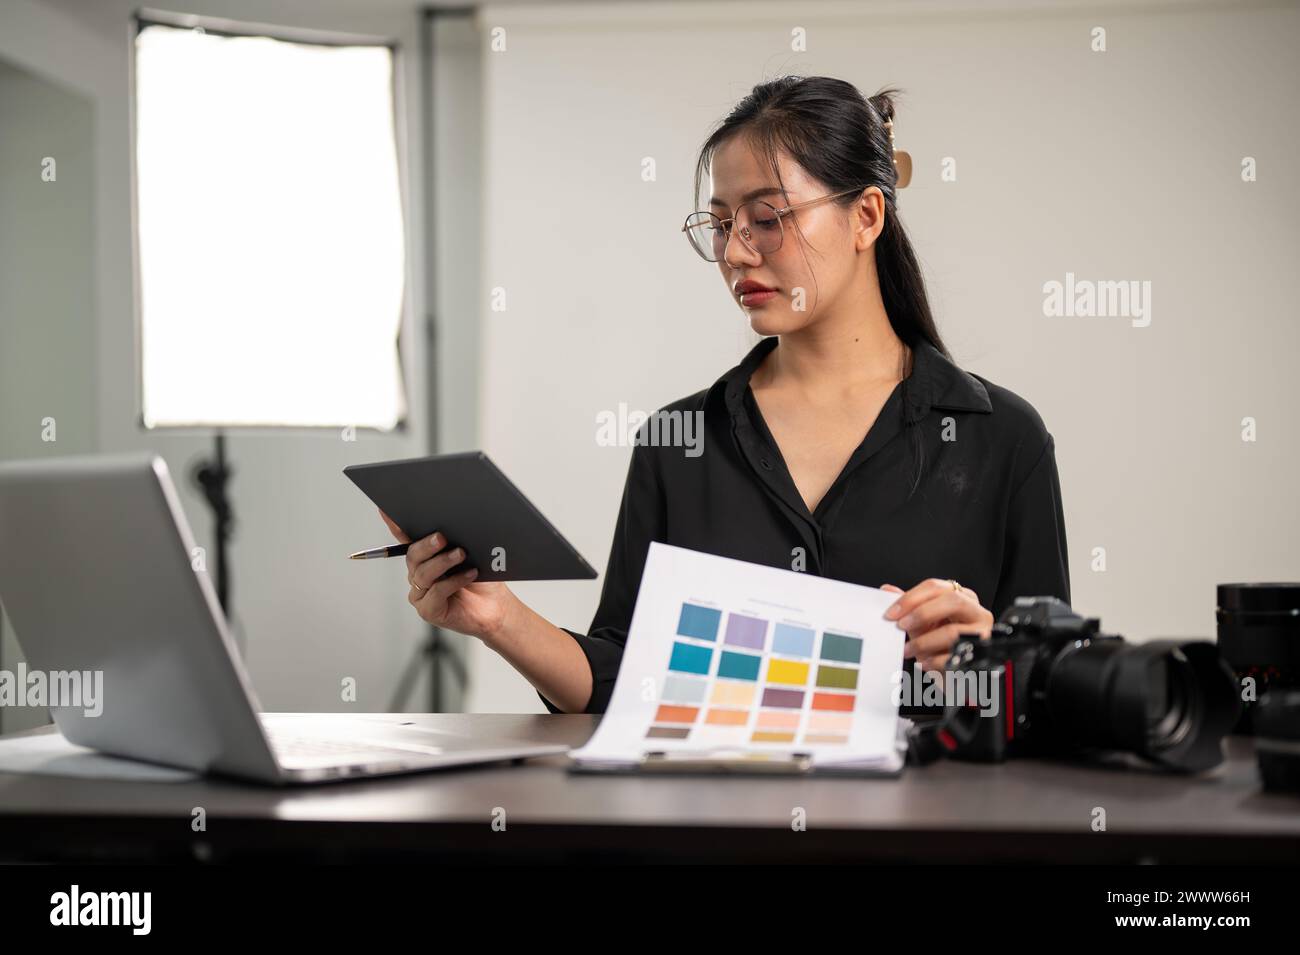 A professional, focused Asian female photographer is looking at a color checker, checking color, working in a photoshoot studio. Stock Photo